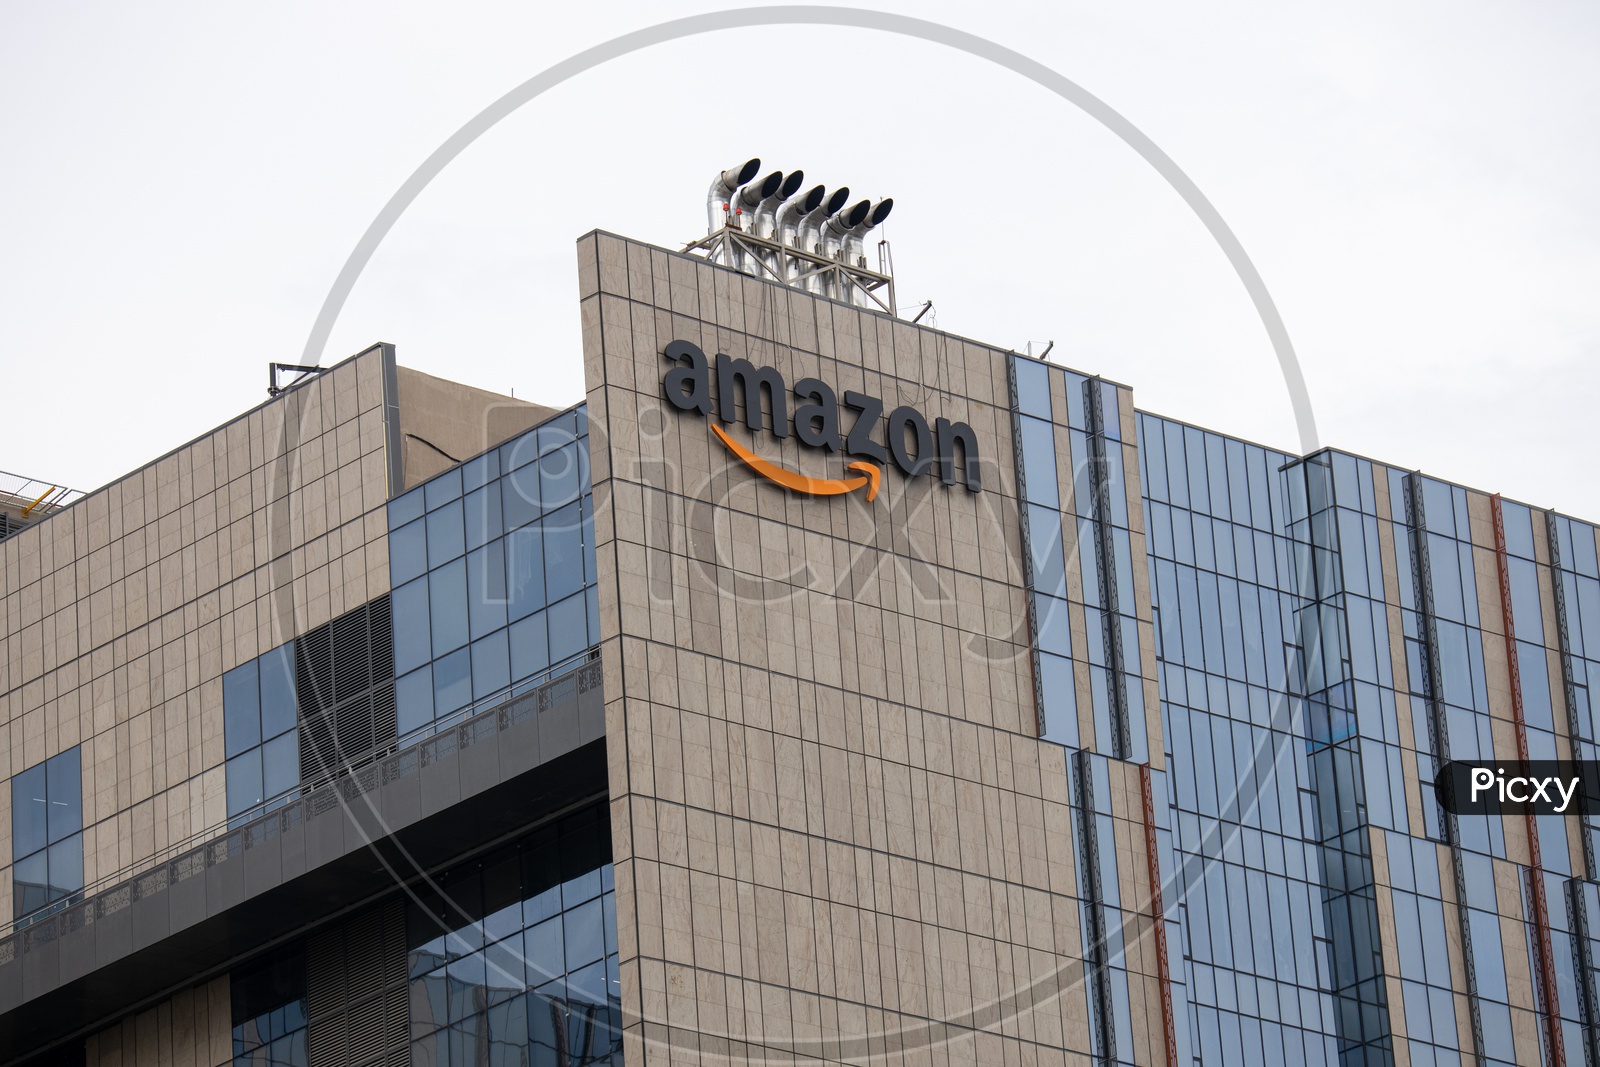 Image Of New Amazon Corporate Campus In Financial District Hyderabad Mh8486 Picxy